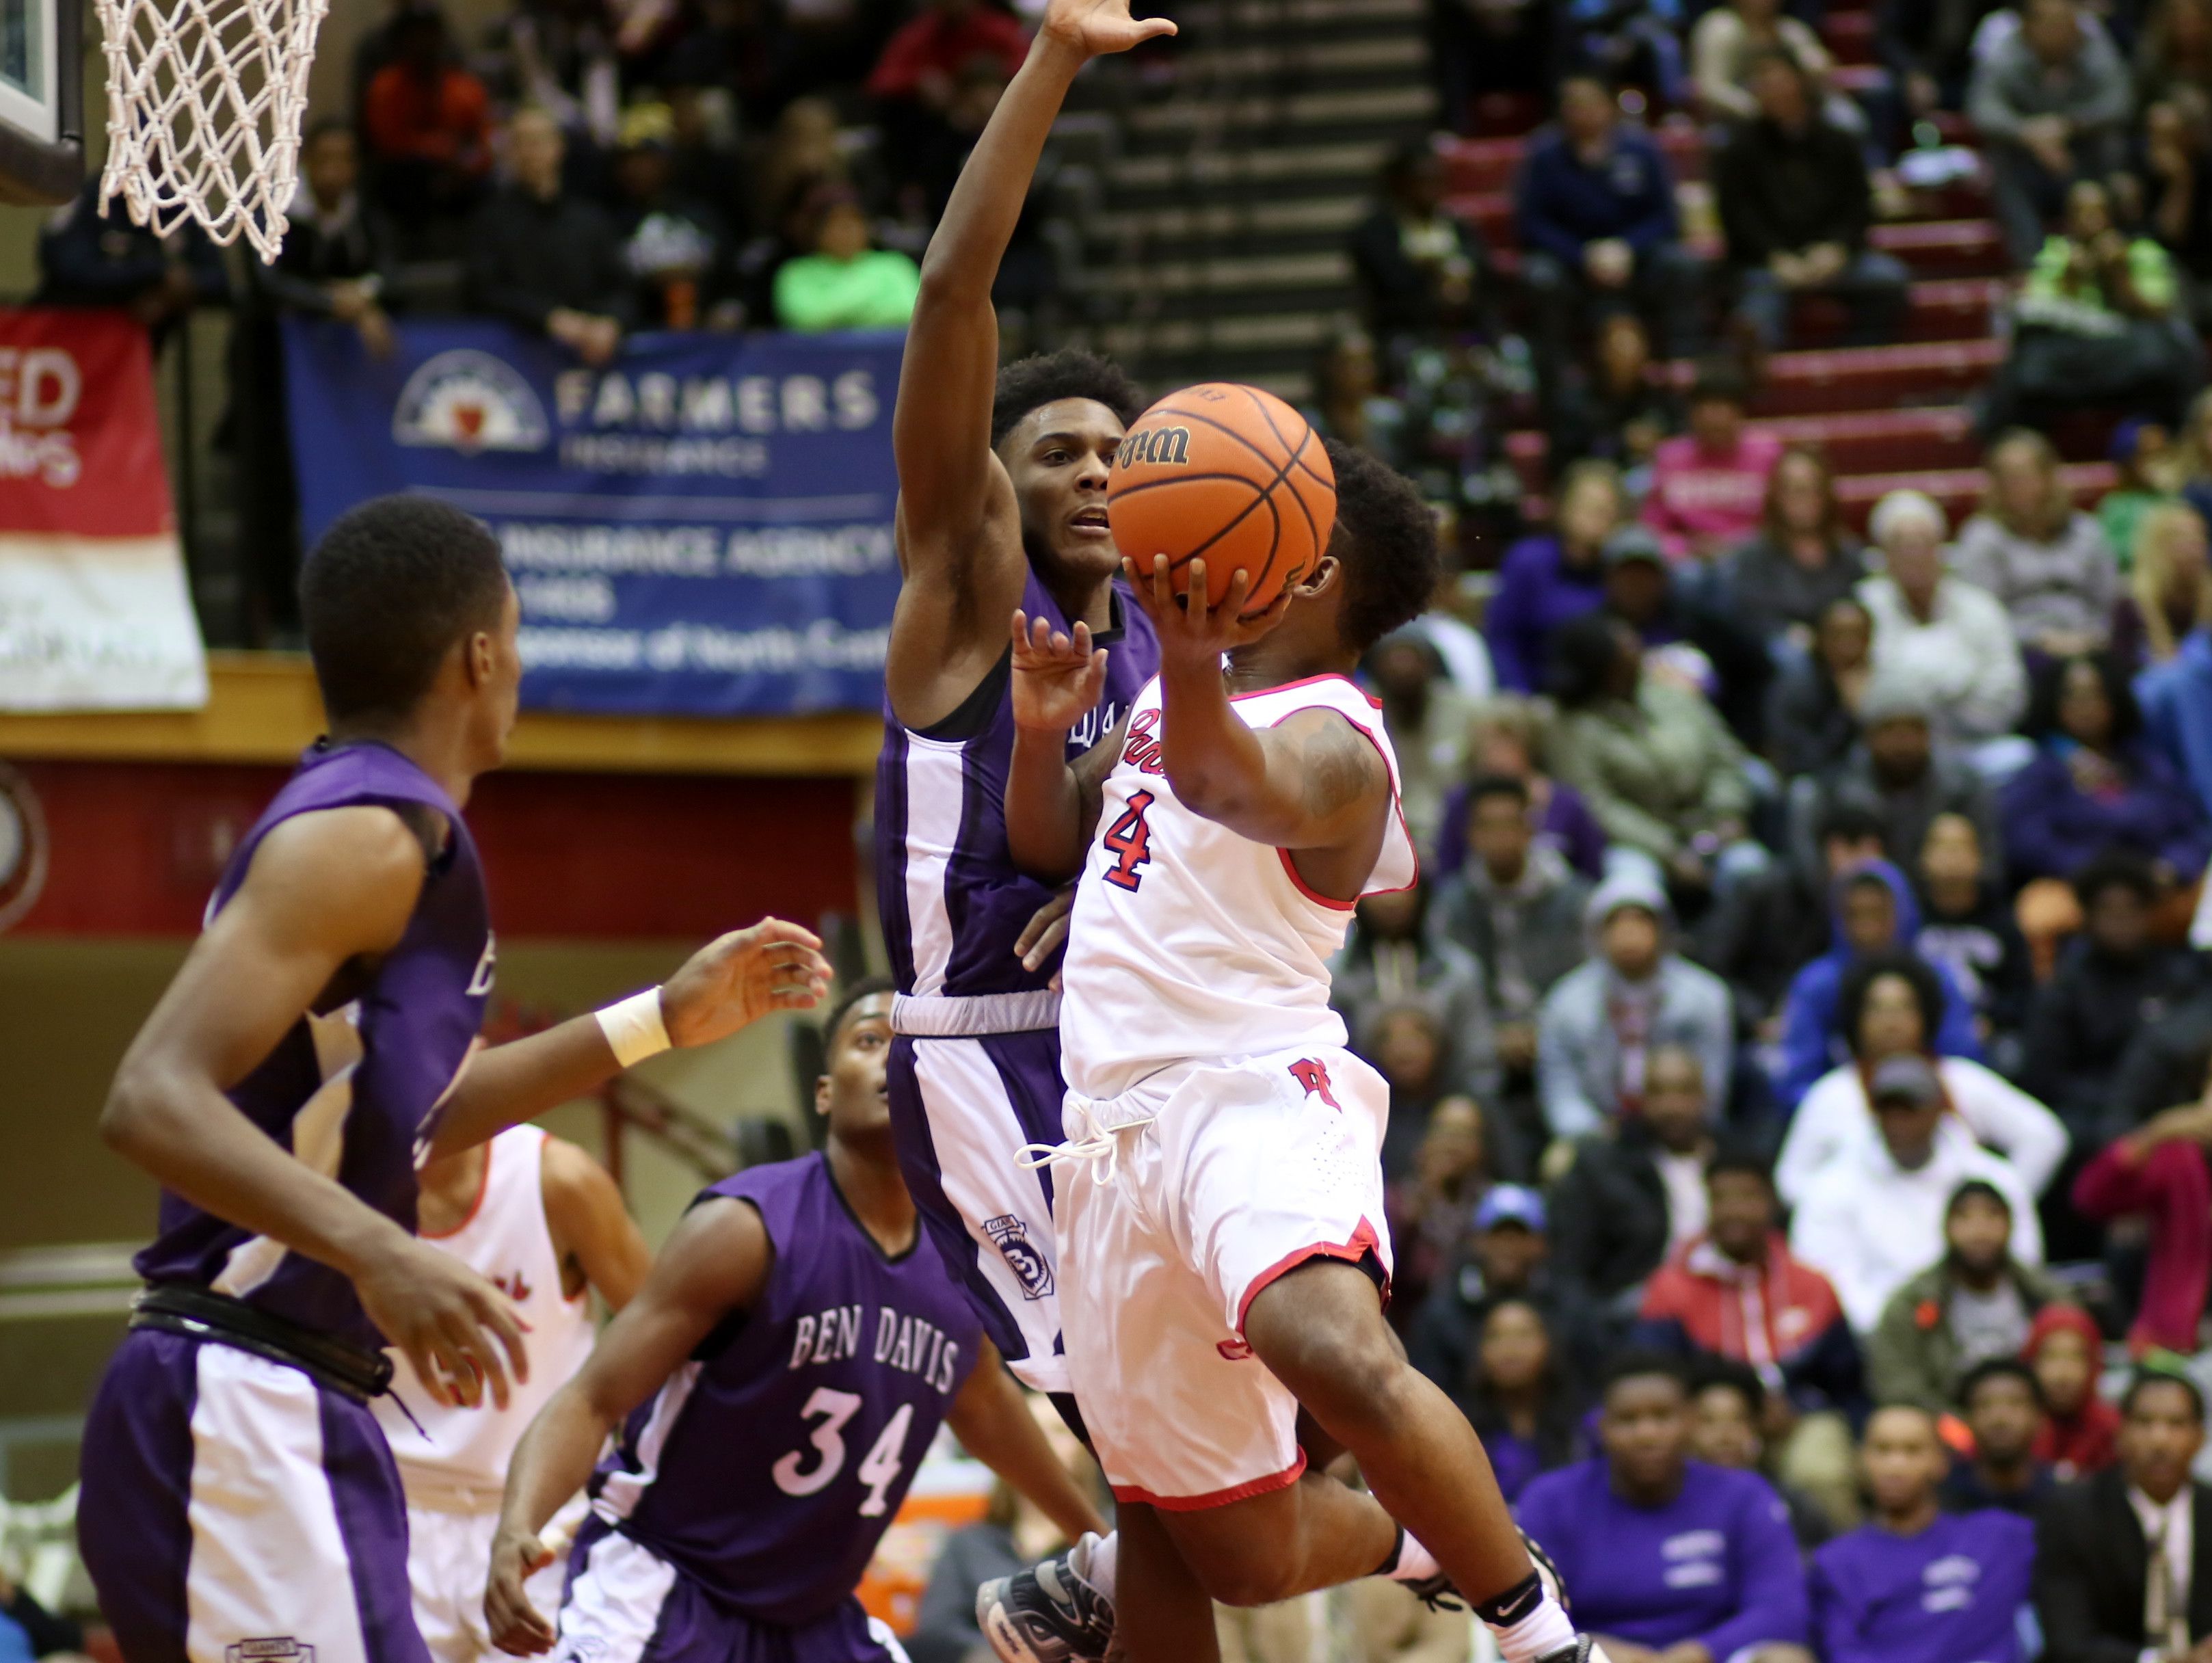 North Central's Emmanuel Little rises up against a Ben Davis' Trevaughn Bush during Friday night's game in Indianapolis.